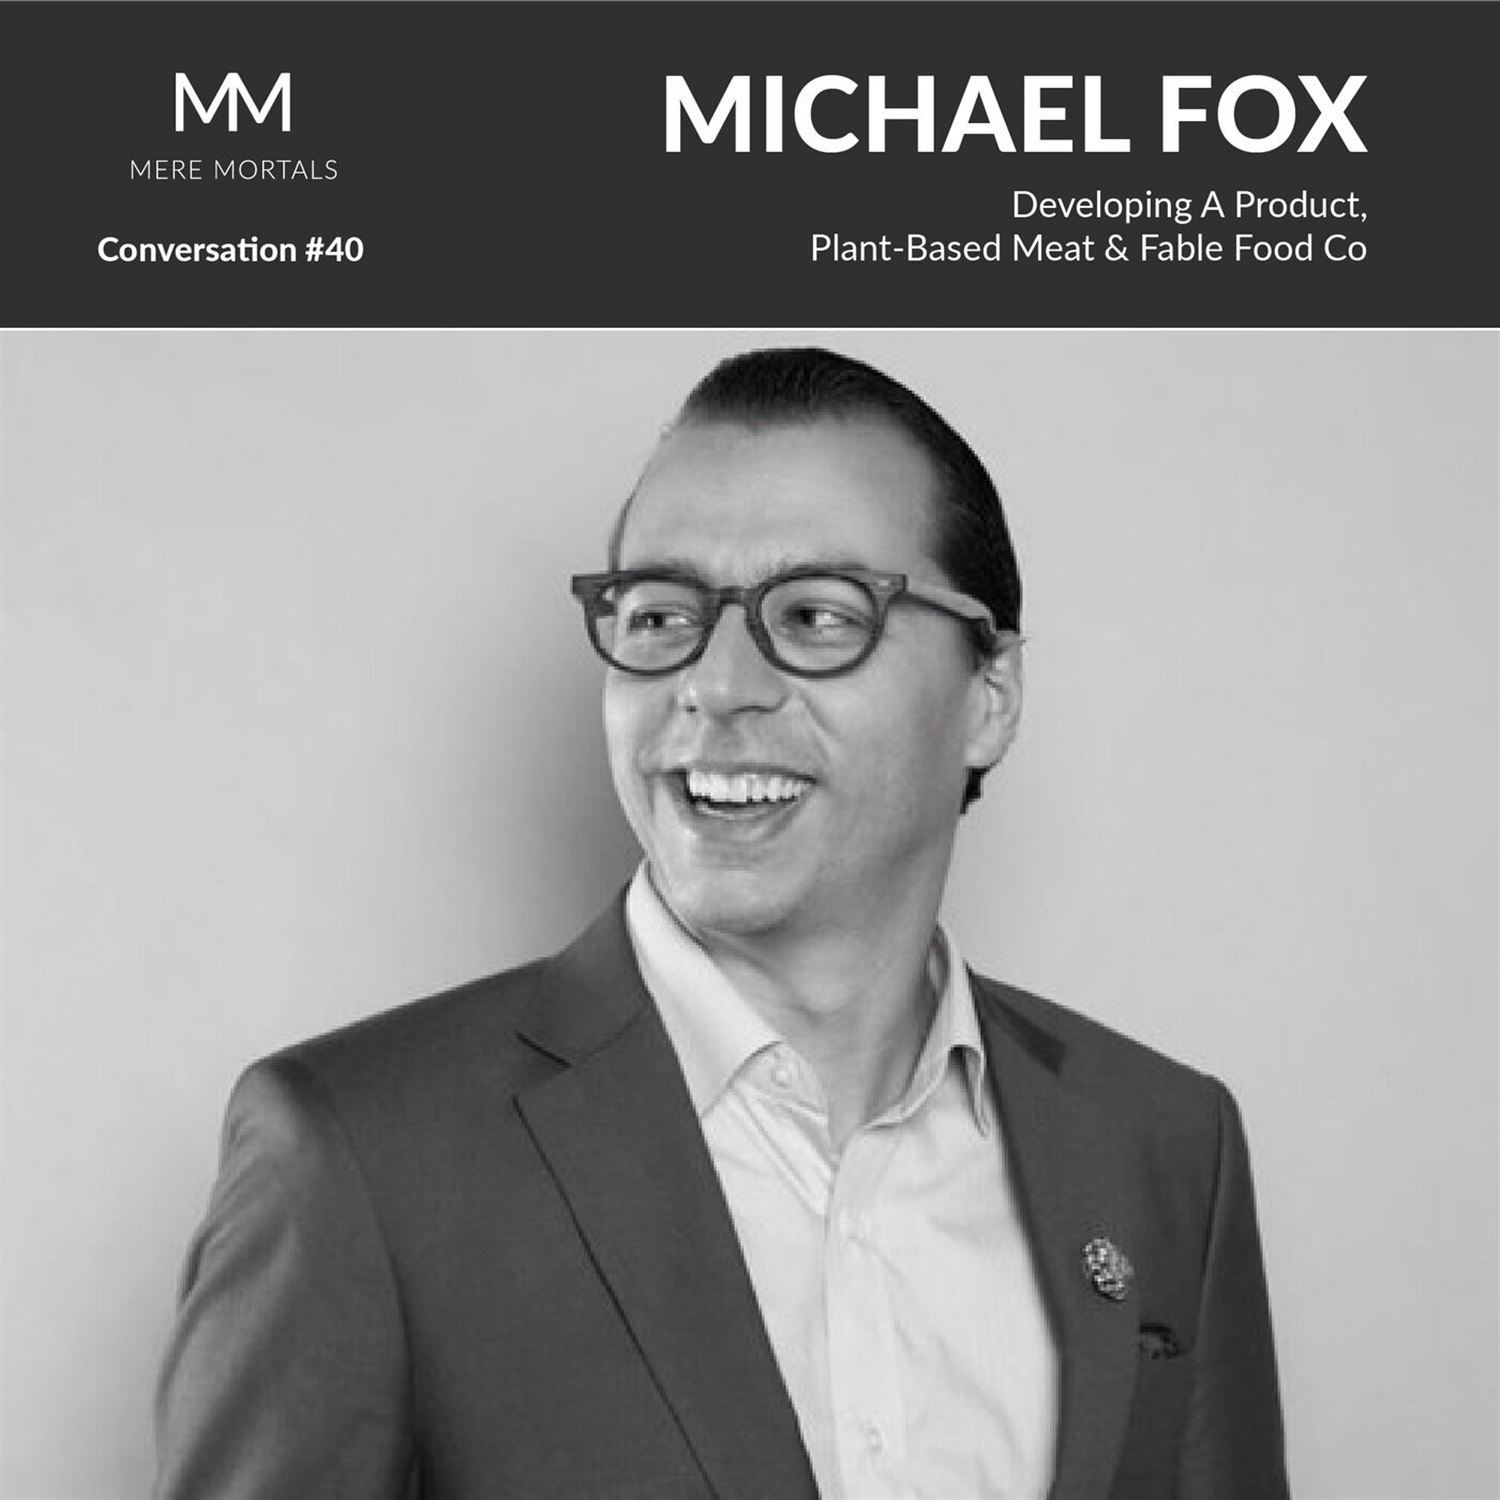 MICHAEL FOX | Developing A Product, Plant-Based Meat & Fable Food Co: Mere Mortals Conversation #40